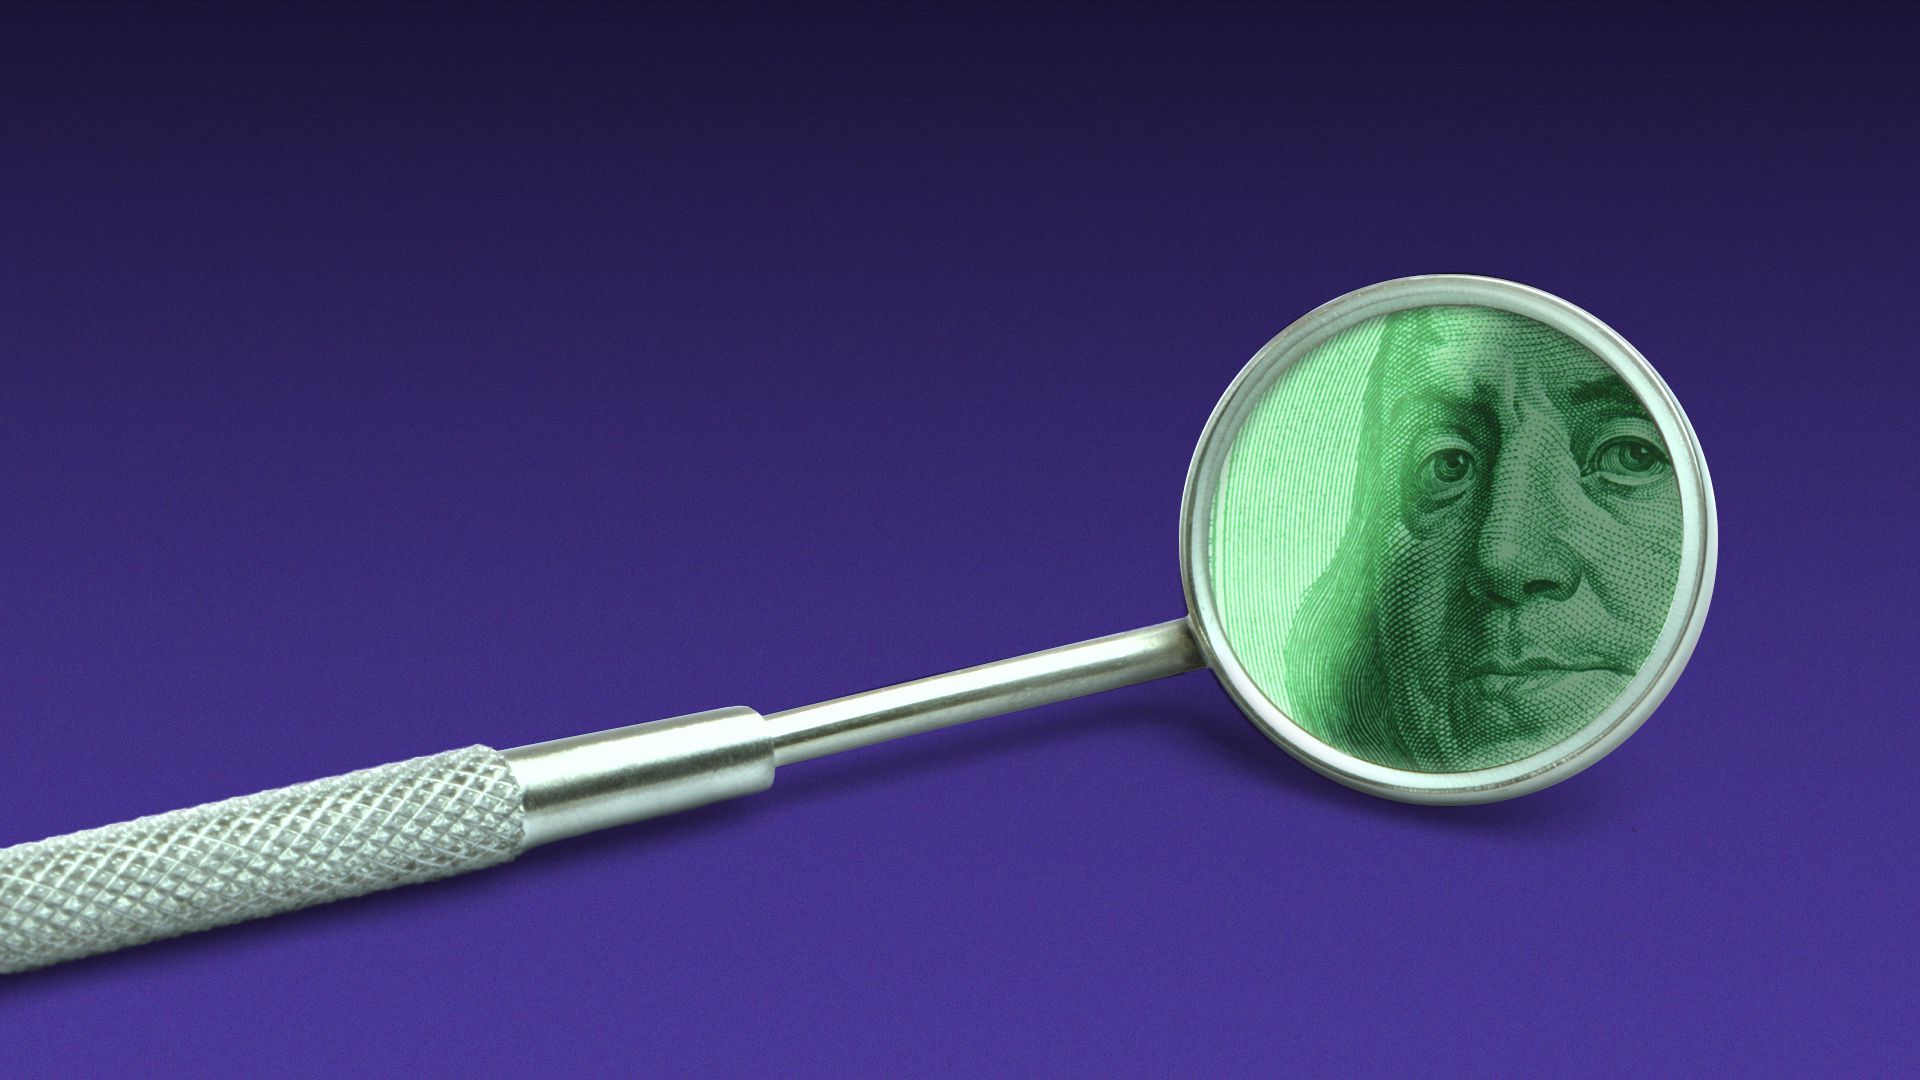 Illustration of a mouth mirror with Benjamin Franklin's face reflected in it.